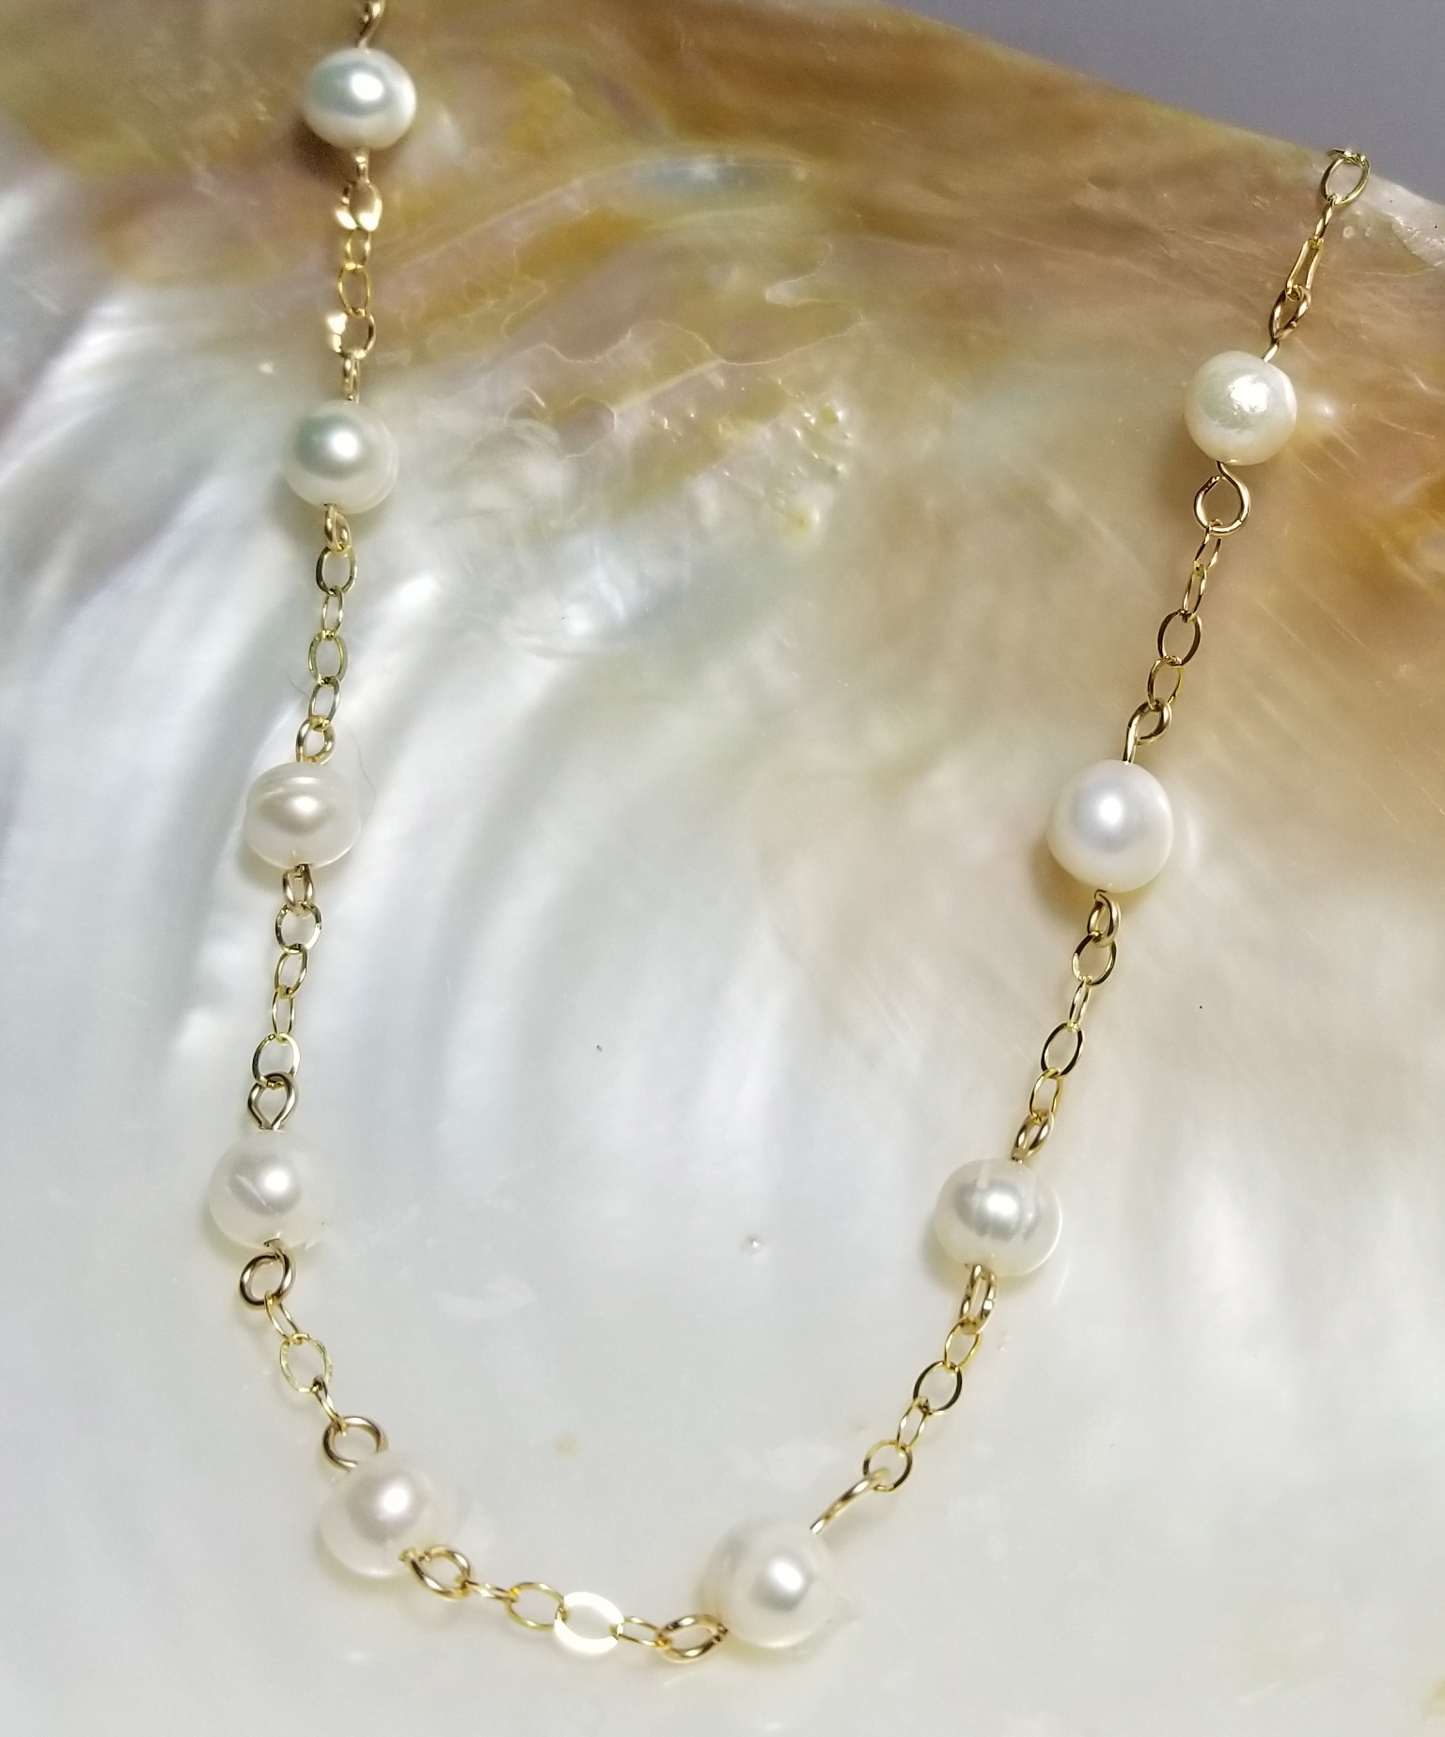 Real Freshwater Pearl Necklace Set for Women and Pet-14 KT Gold Filled